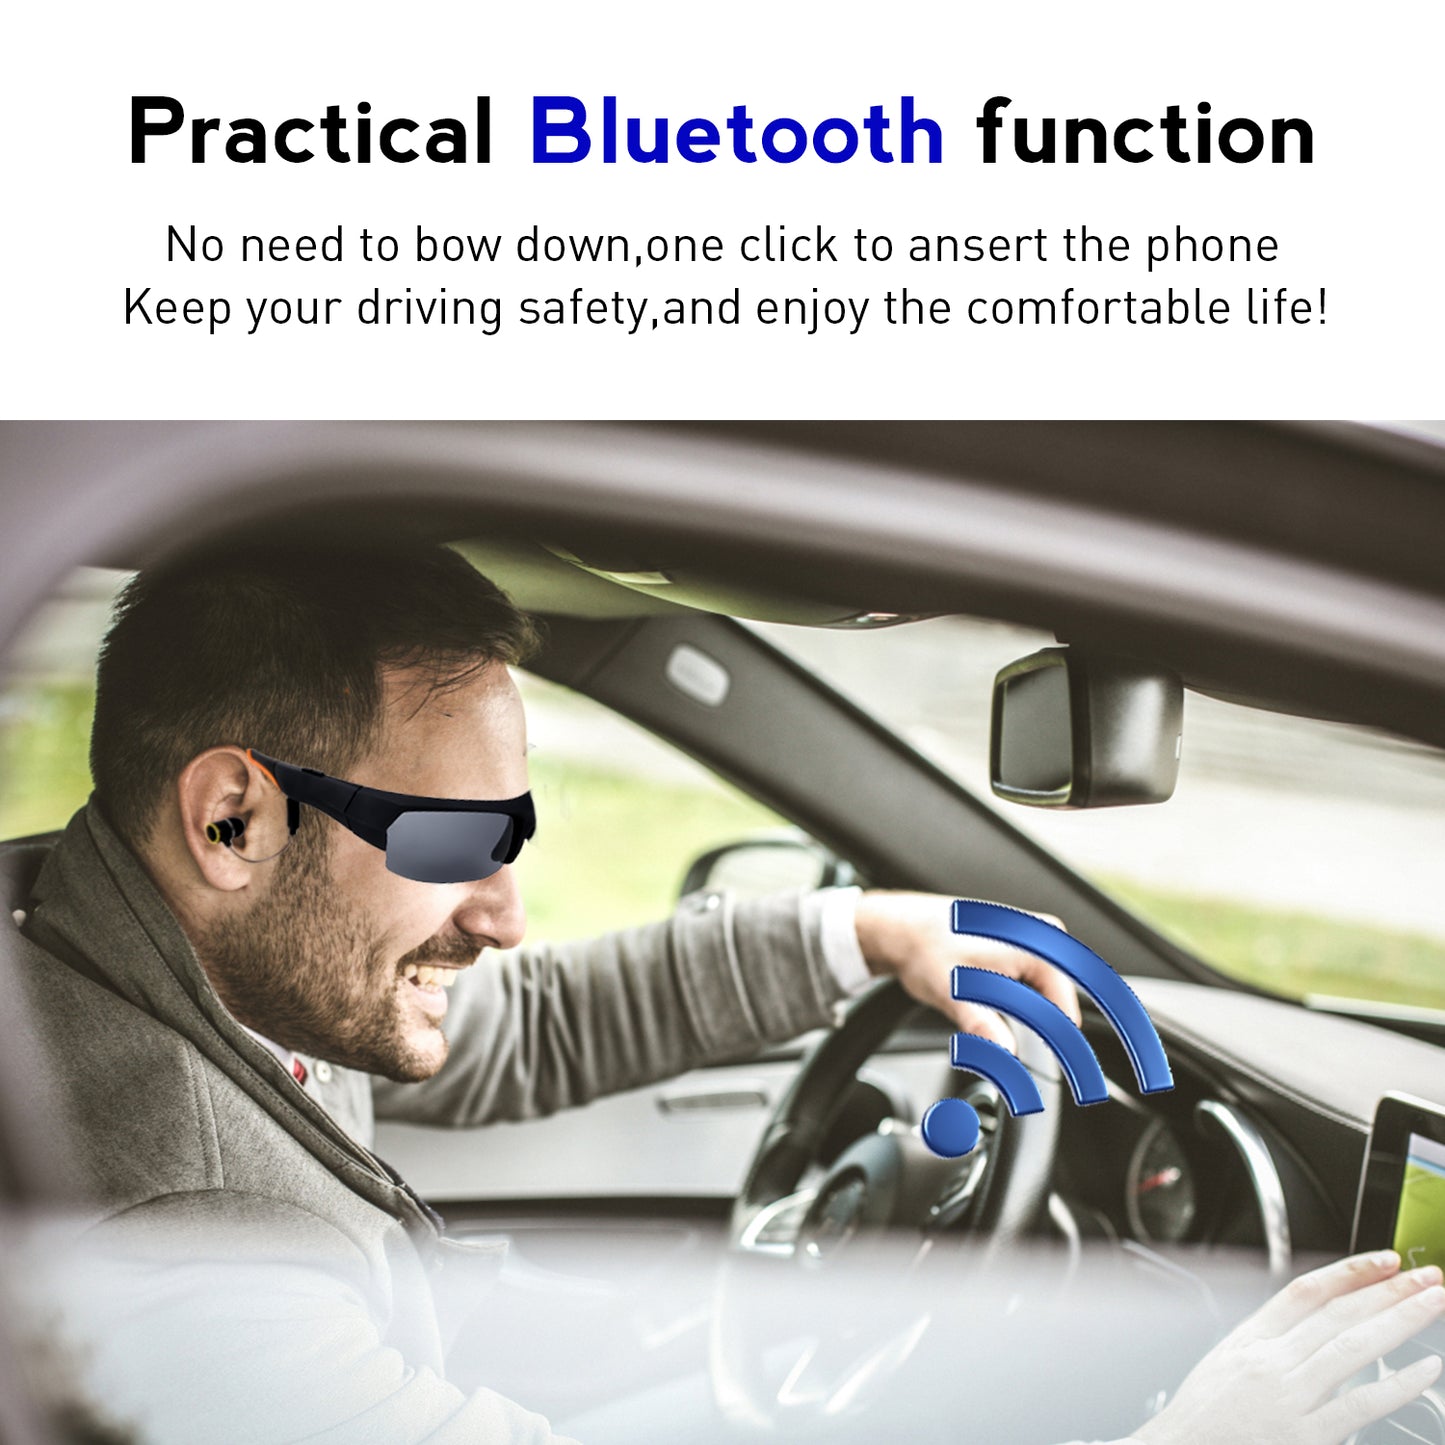 Bluetooth Camera Sunglasses for Men Full HD 1080P Video Recorder Camera with UV Protection Polarized Lens for Driving Riding Fishing Motorcycle and Outdoor Sports Built-in 32GB Memory Card